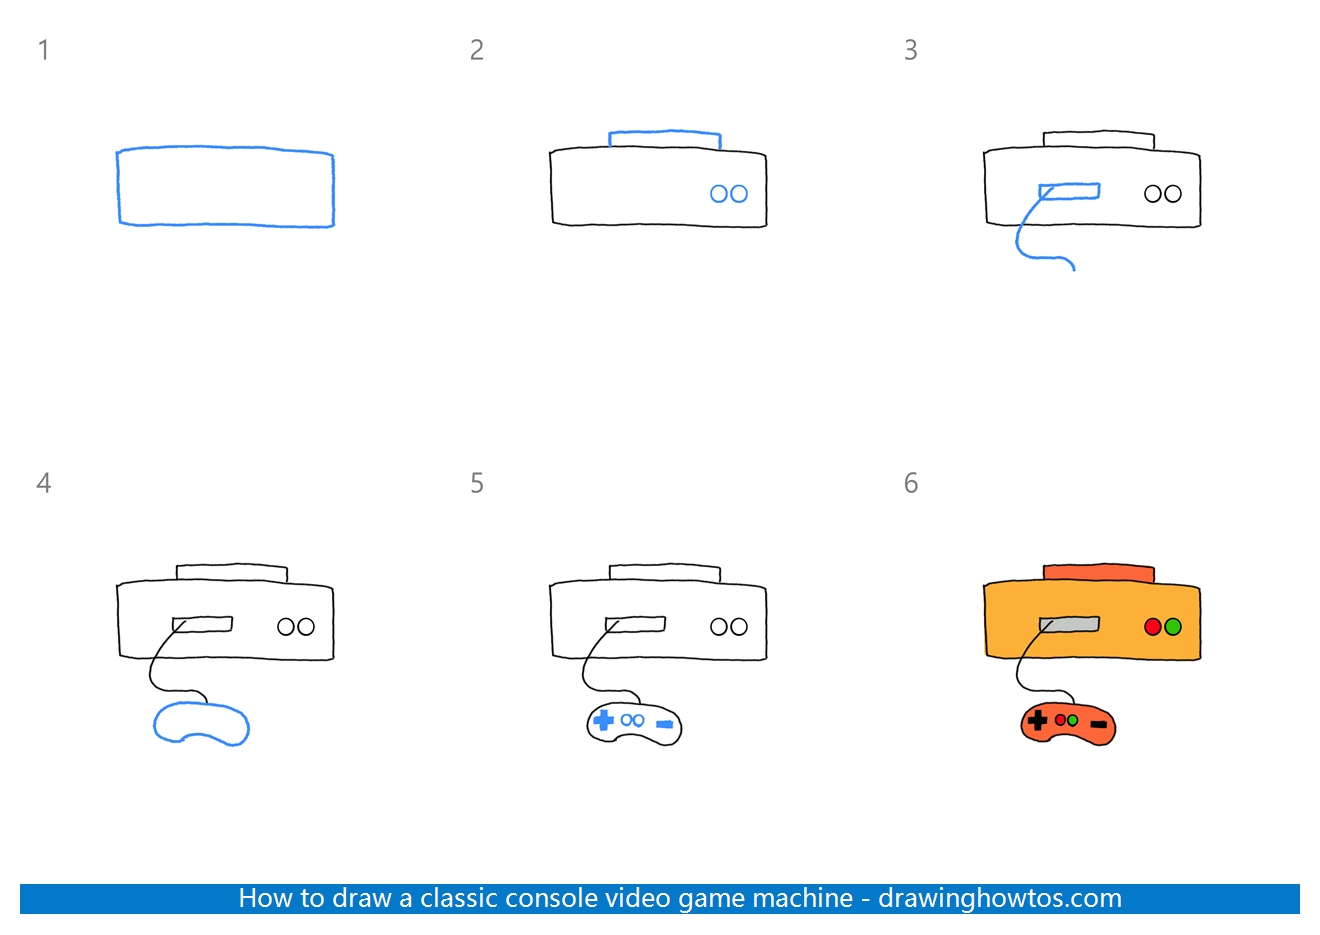 How to Draw a Classic Console Video Game Machine Step by Step